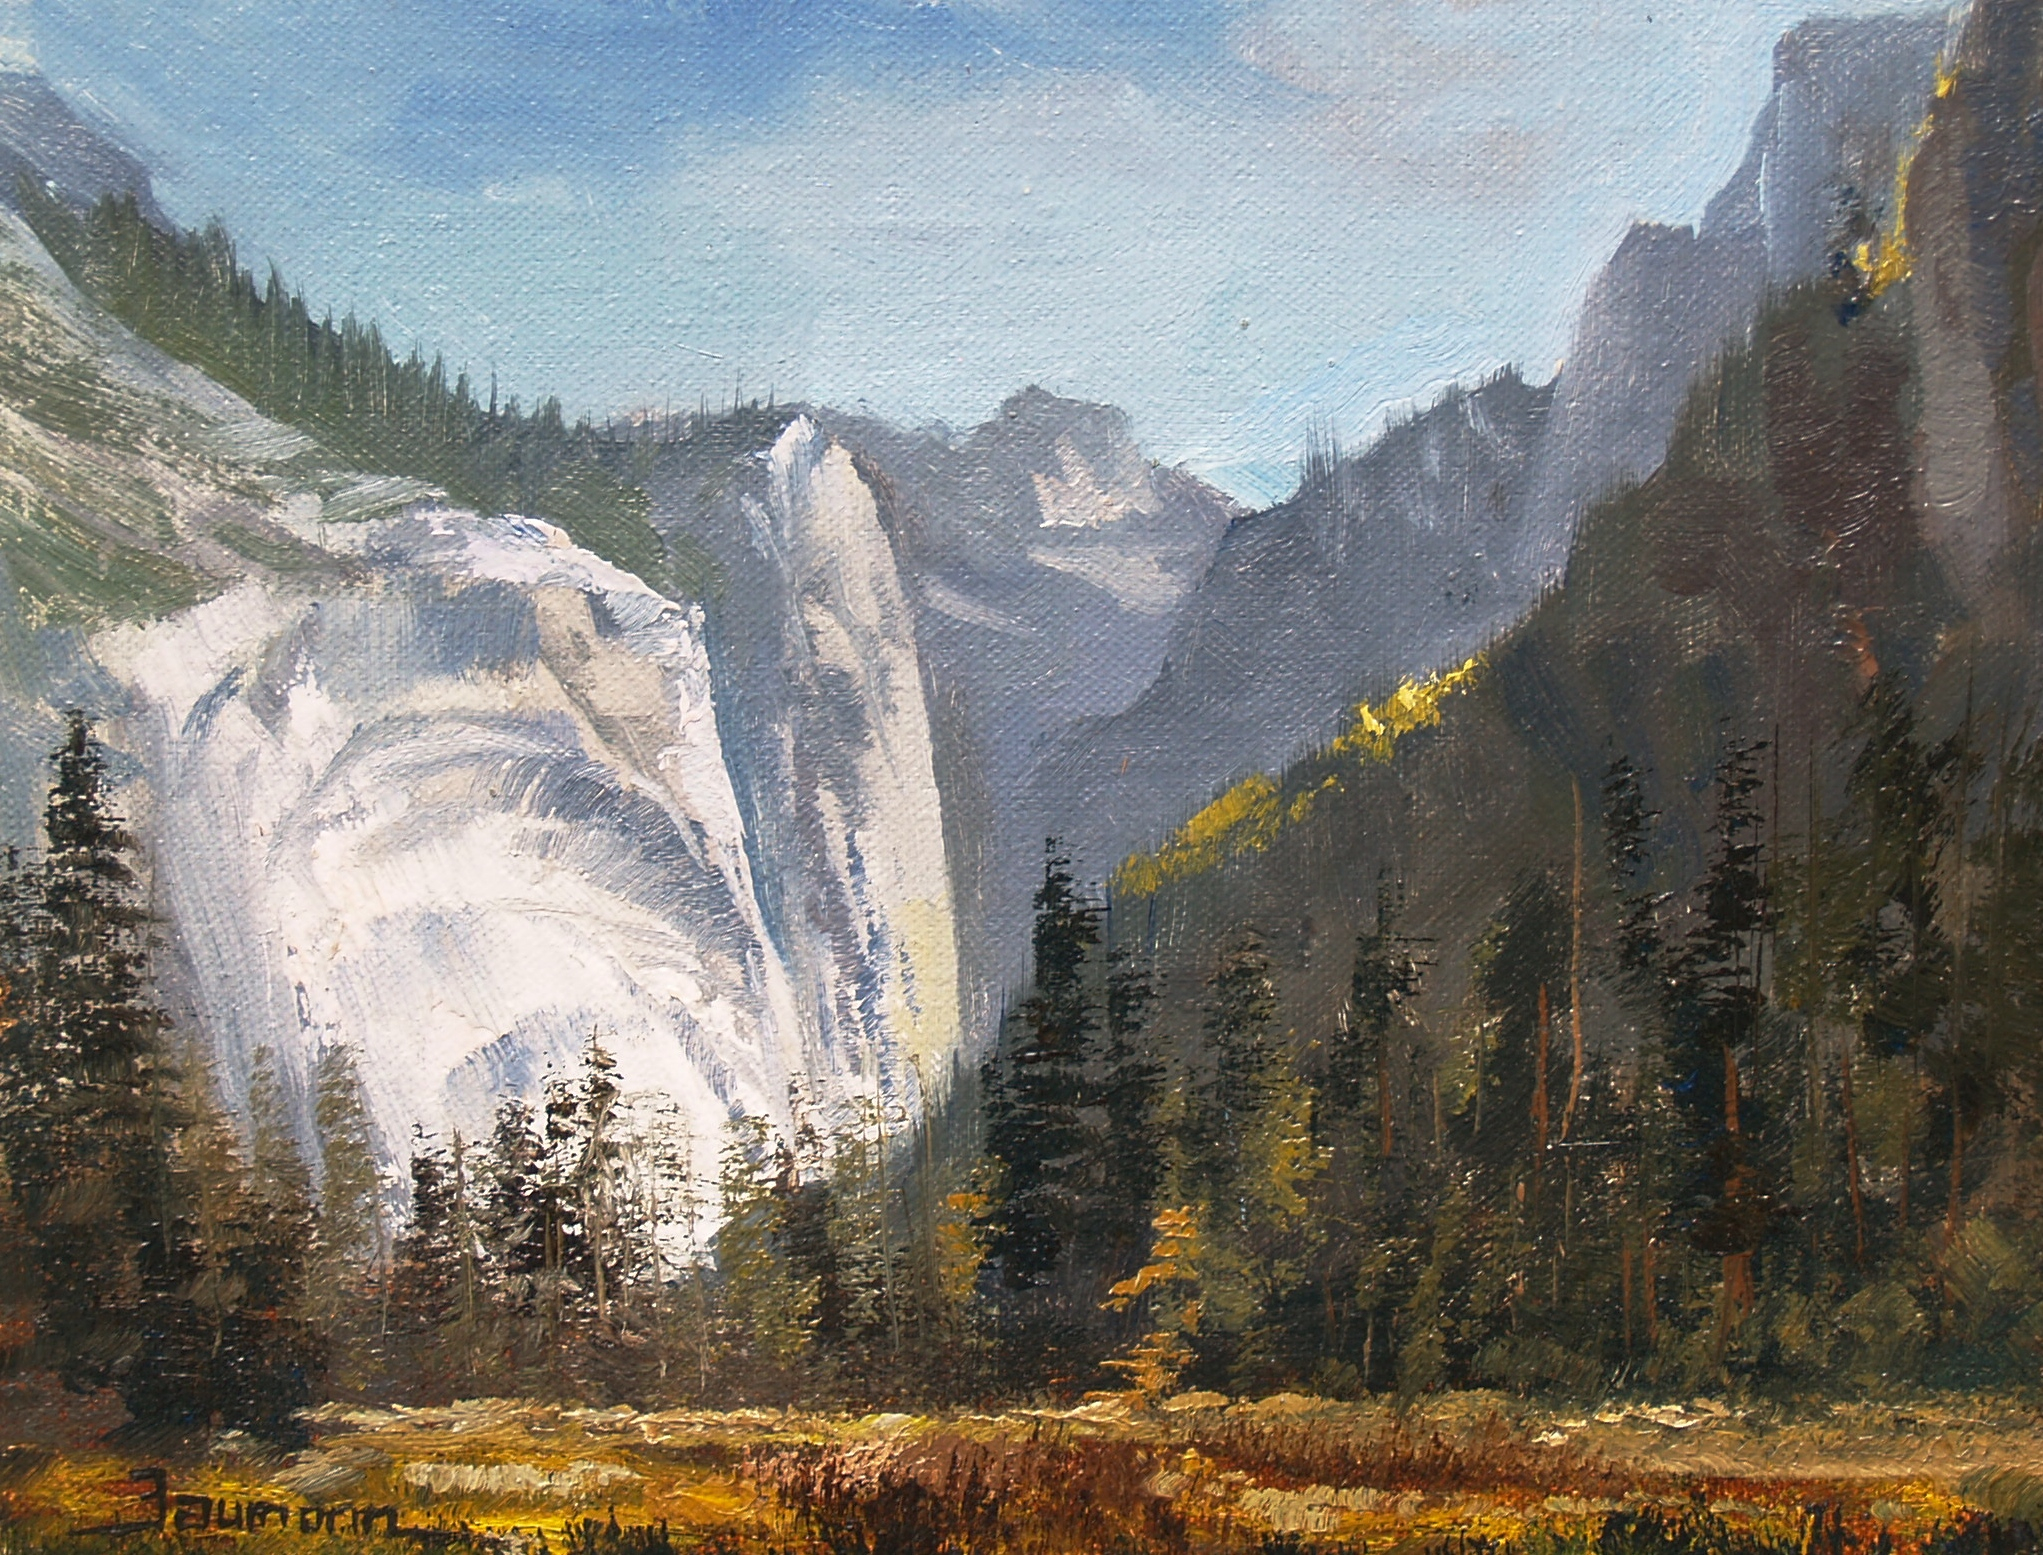 This painting of the Arches in Yosemite park by Stefan Baumann is a beautiful landscape that includes white arches carved by glaciers in the valley.tone on a